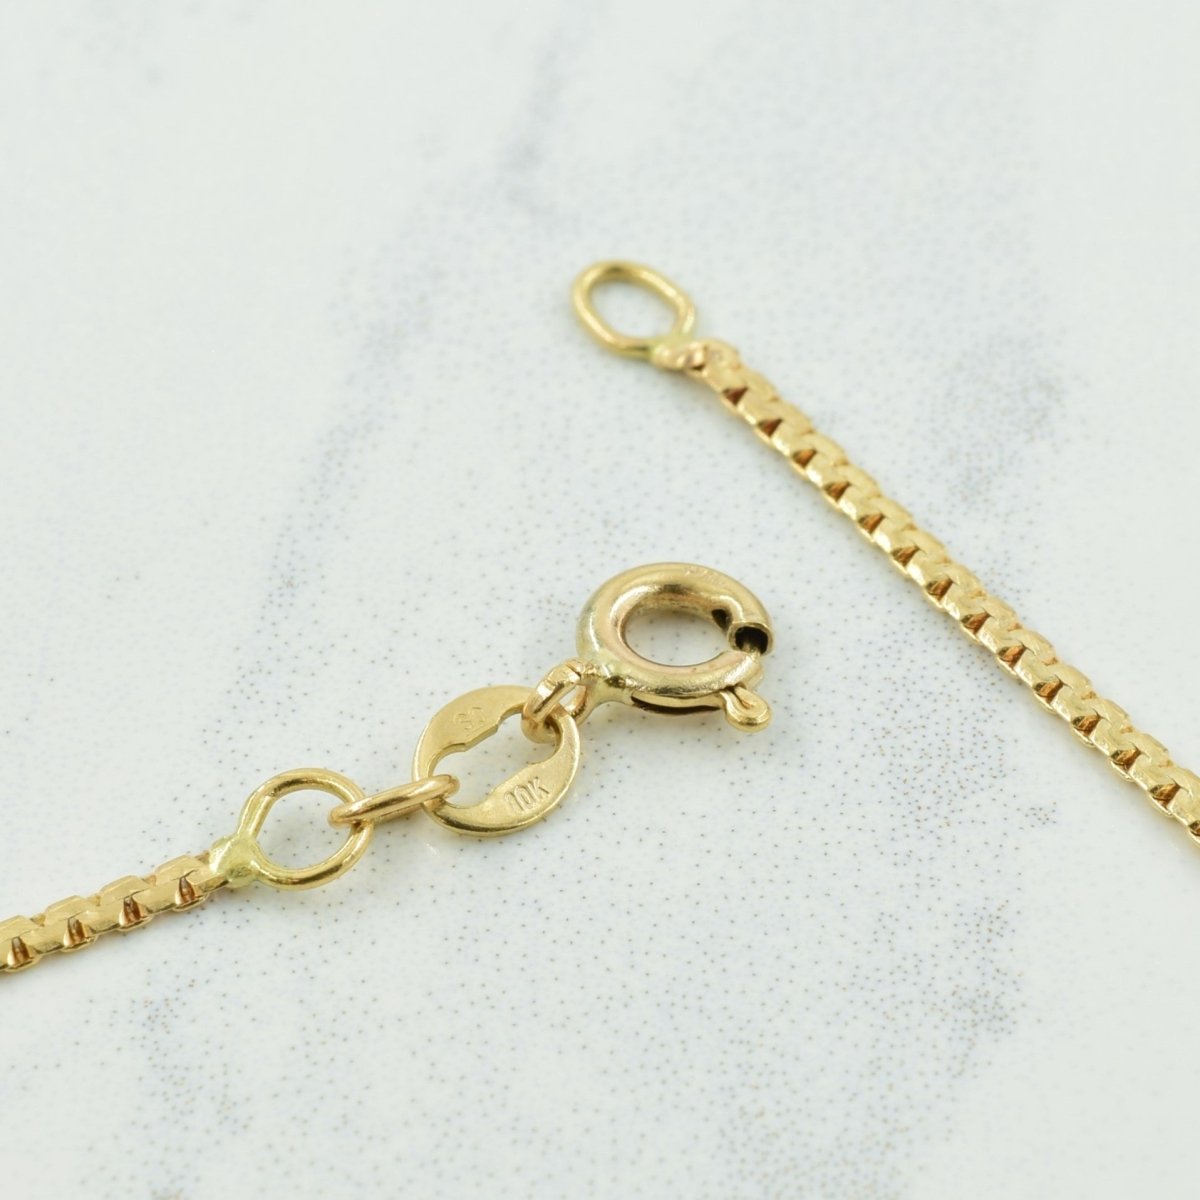 10k Yellow Gold C-Link Chain | 17.5